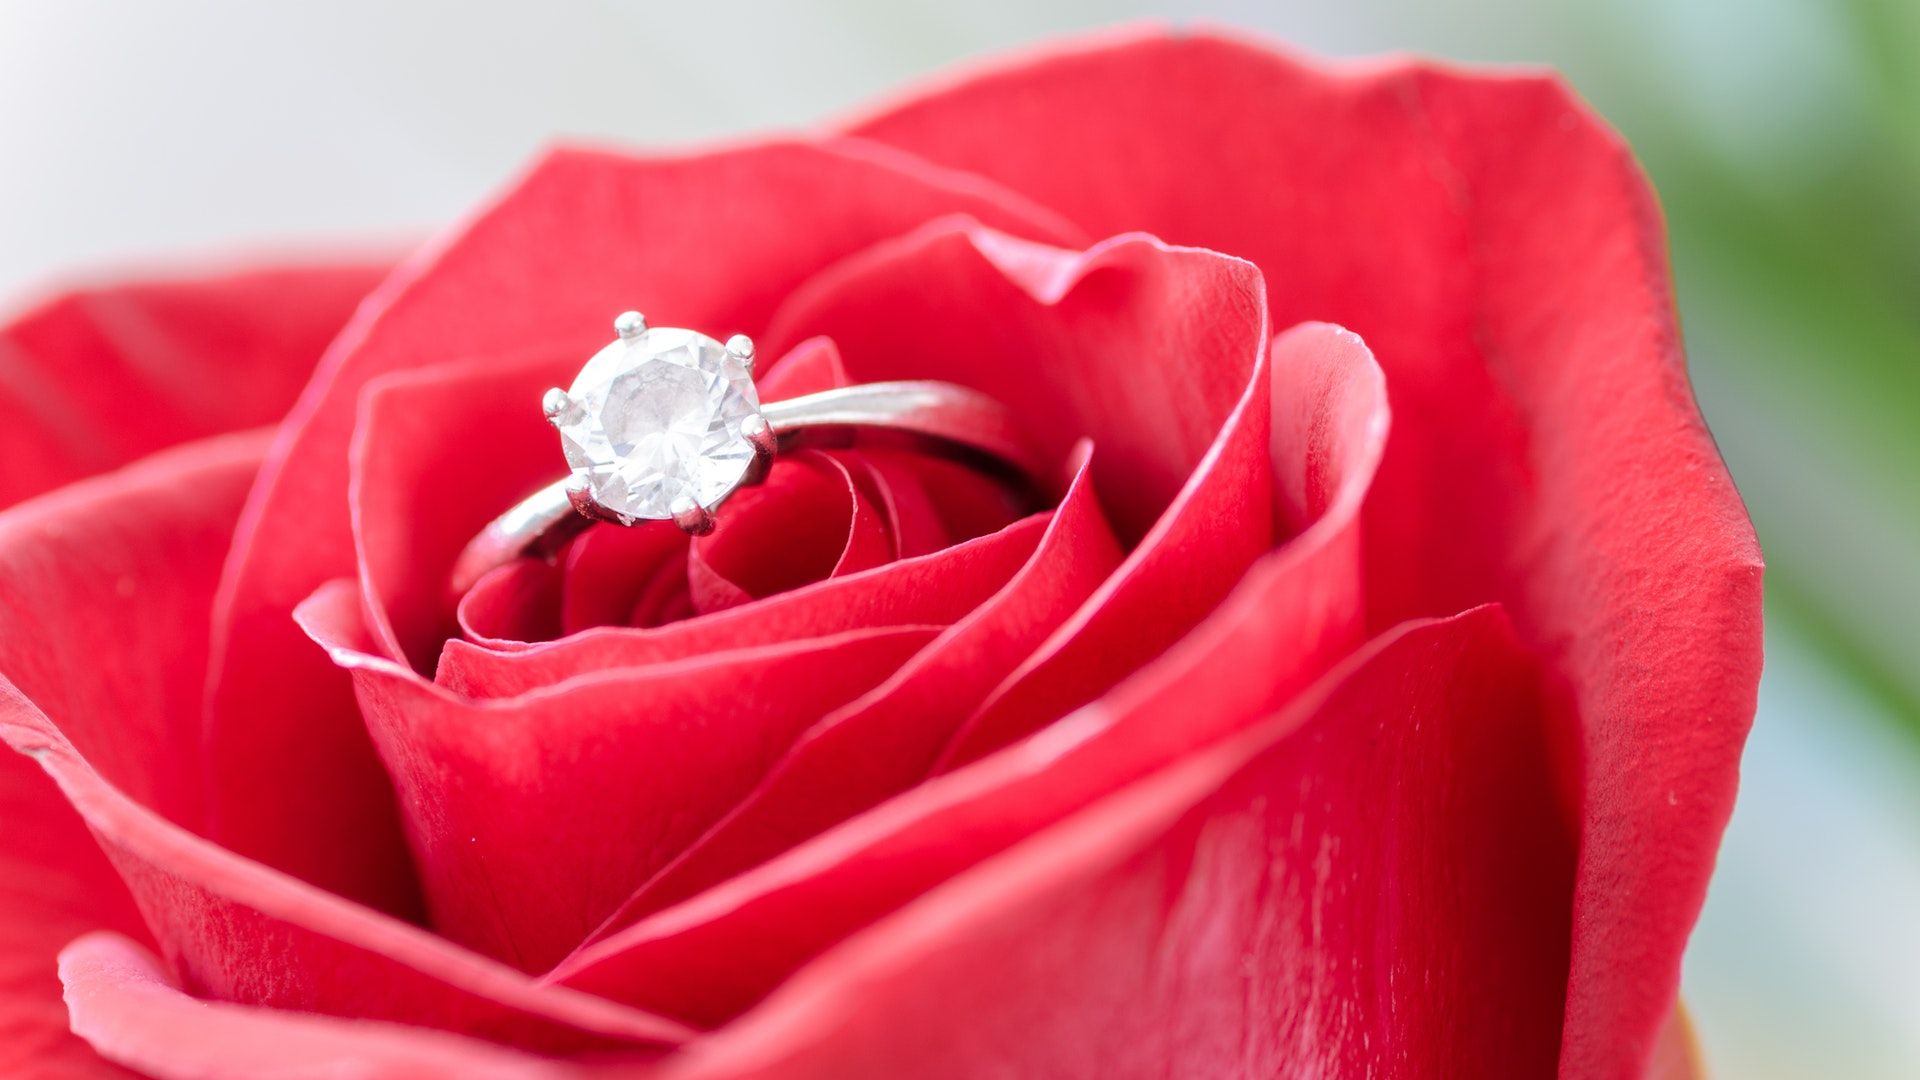 Rose With Diamond Ring - Romantic Red Rose Love , HD Wallpaper & Backgrounds